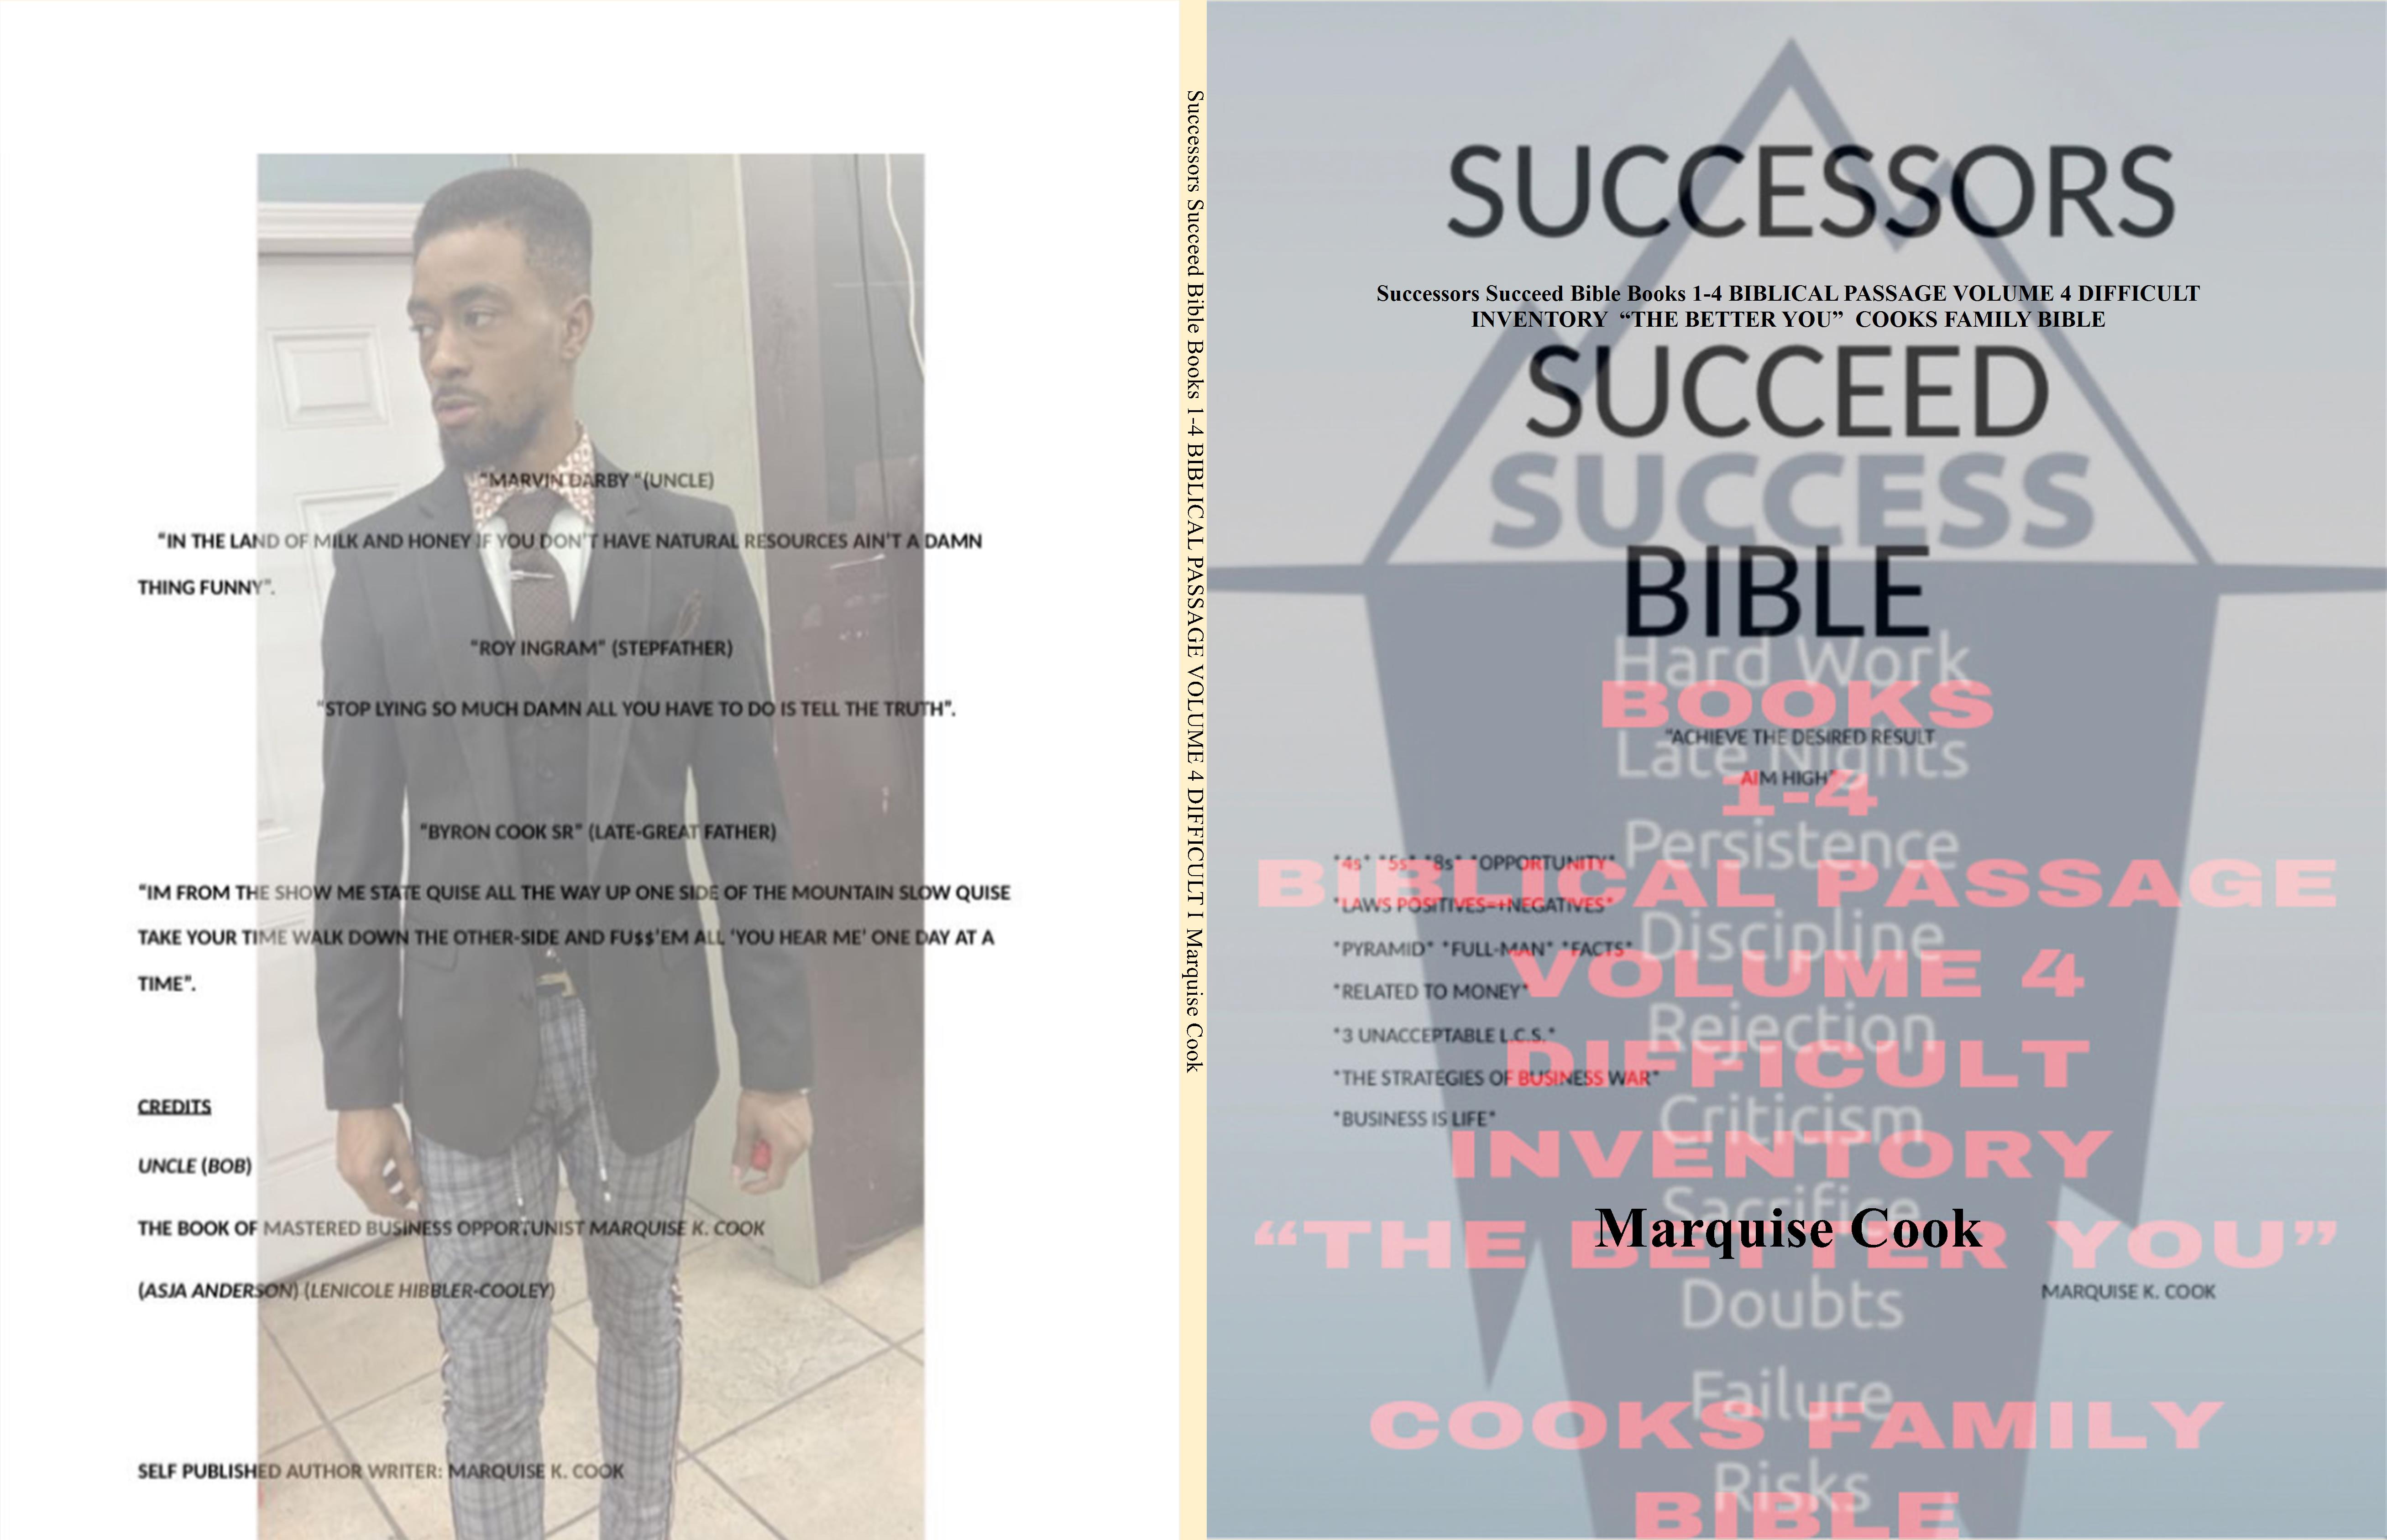 Successors Succeed Bible Books 1-4 BIBLICAL PASSAGE VOLUME 4 DIFFICULT INVENTORY  “THE BETTER YOU”  COOKS FAMILY BIBLE cover image